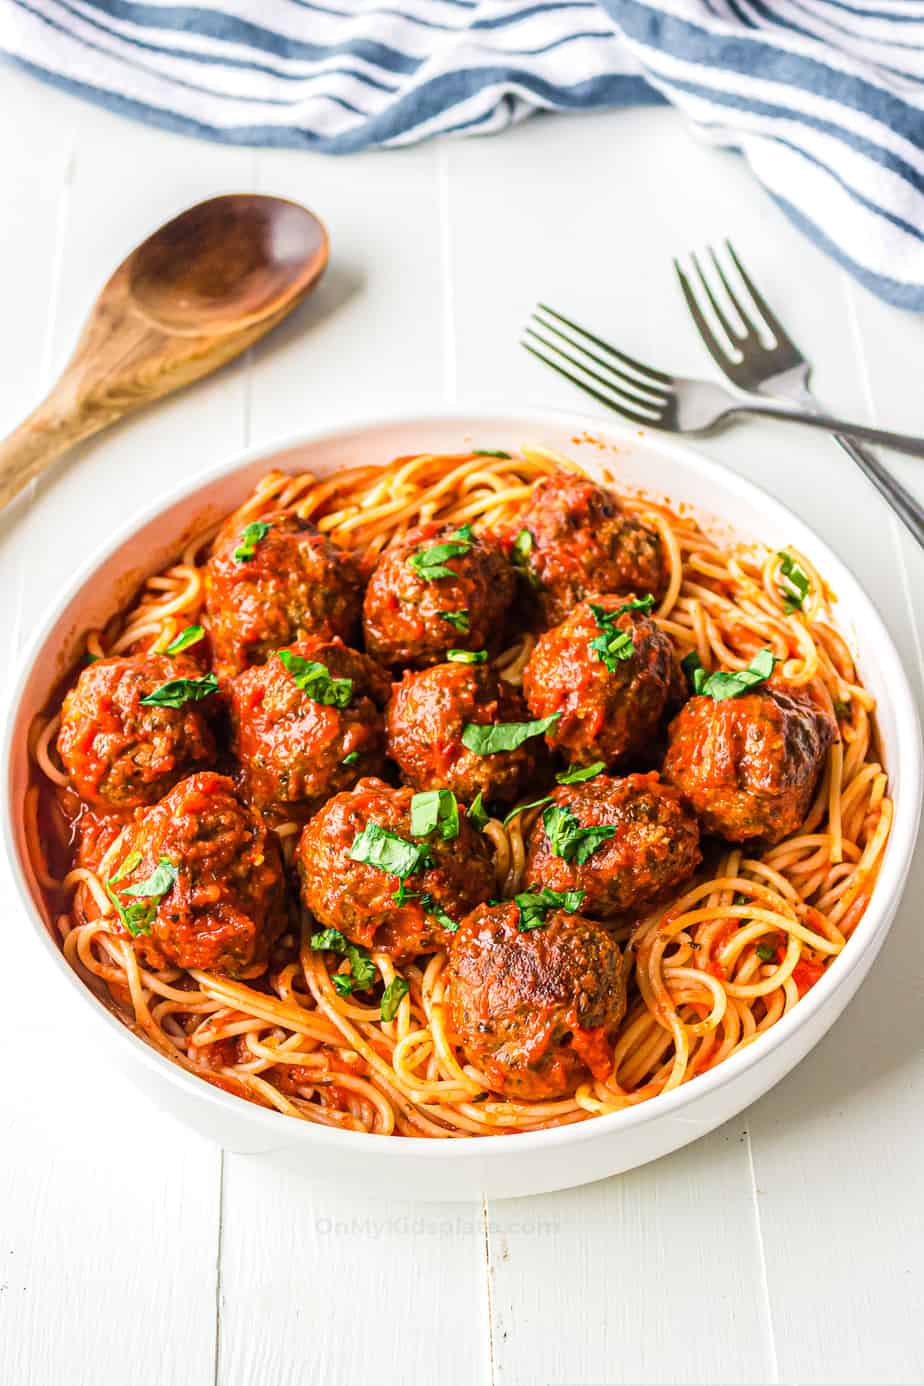 Meatballs in a large bowl over top of spaghetti with marinara sauce.